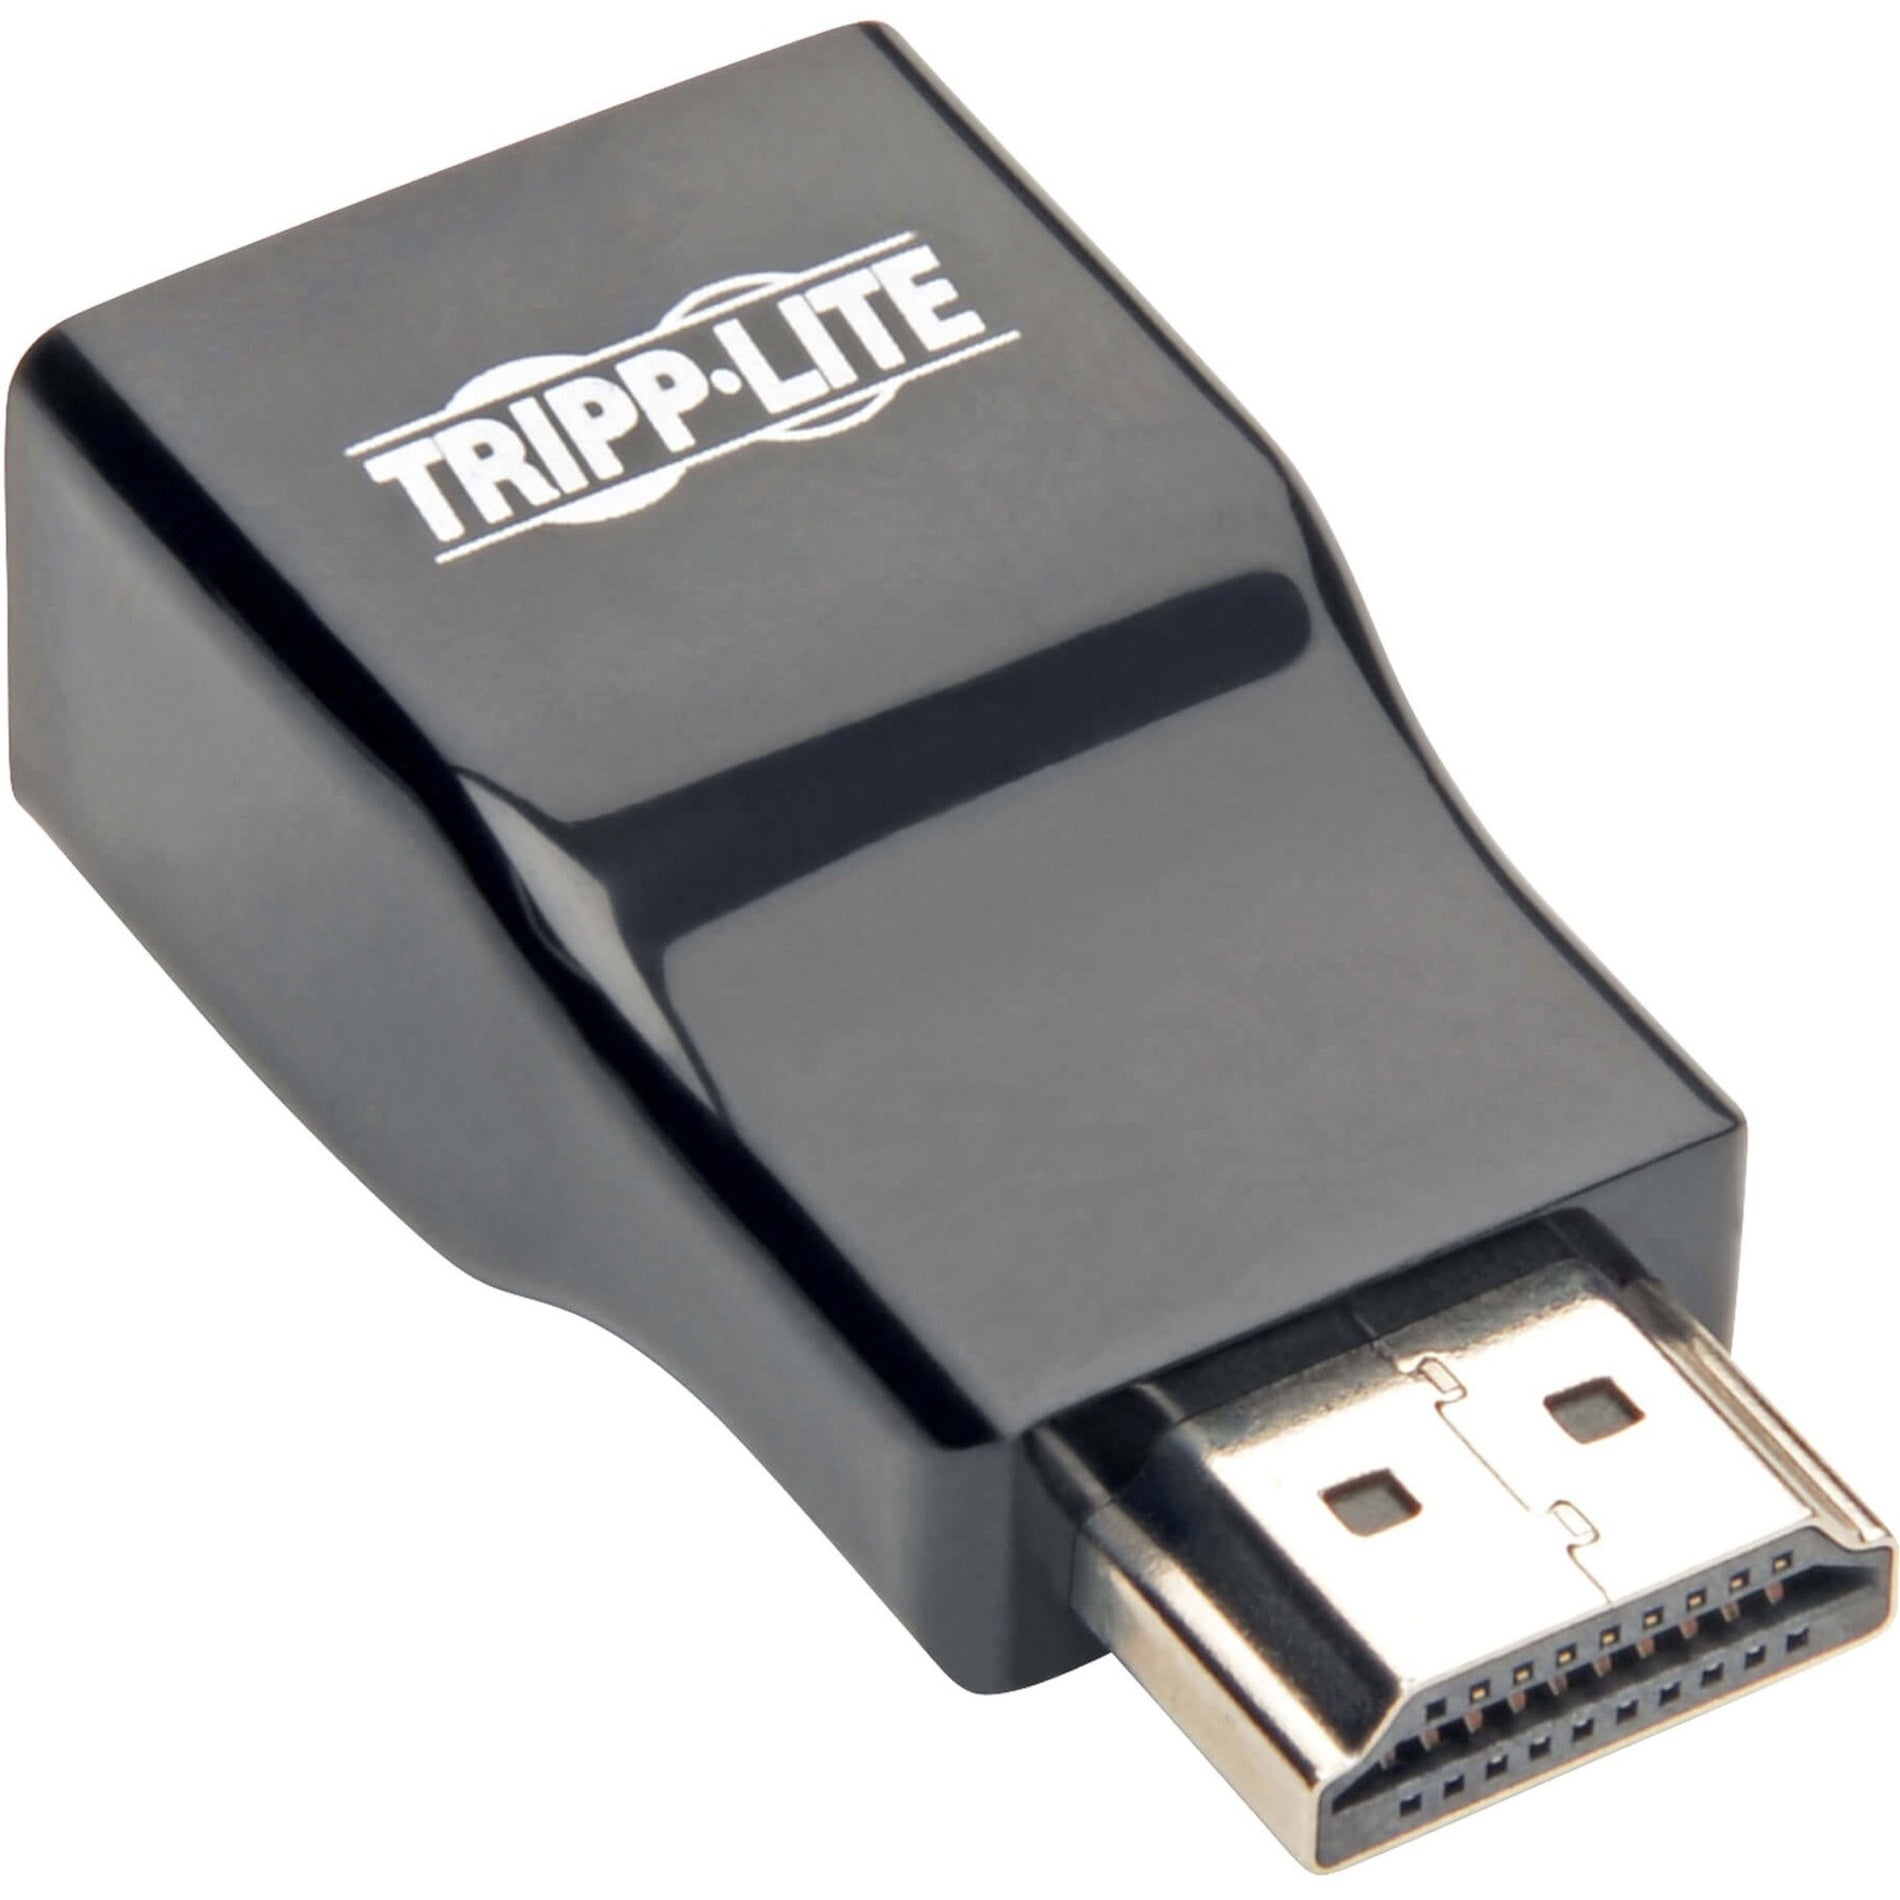 Tripp Lite P131-000 HDMI Male to VGA Female Adapter Video Converter, Supports 1920 x 1080 Resolution